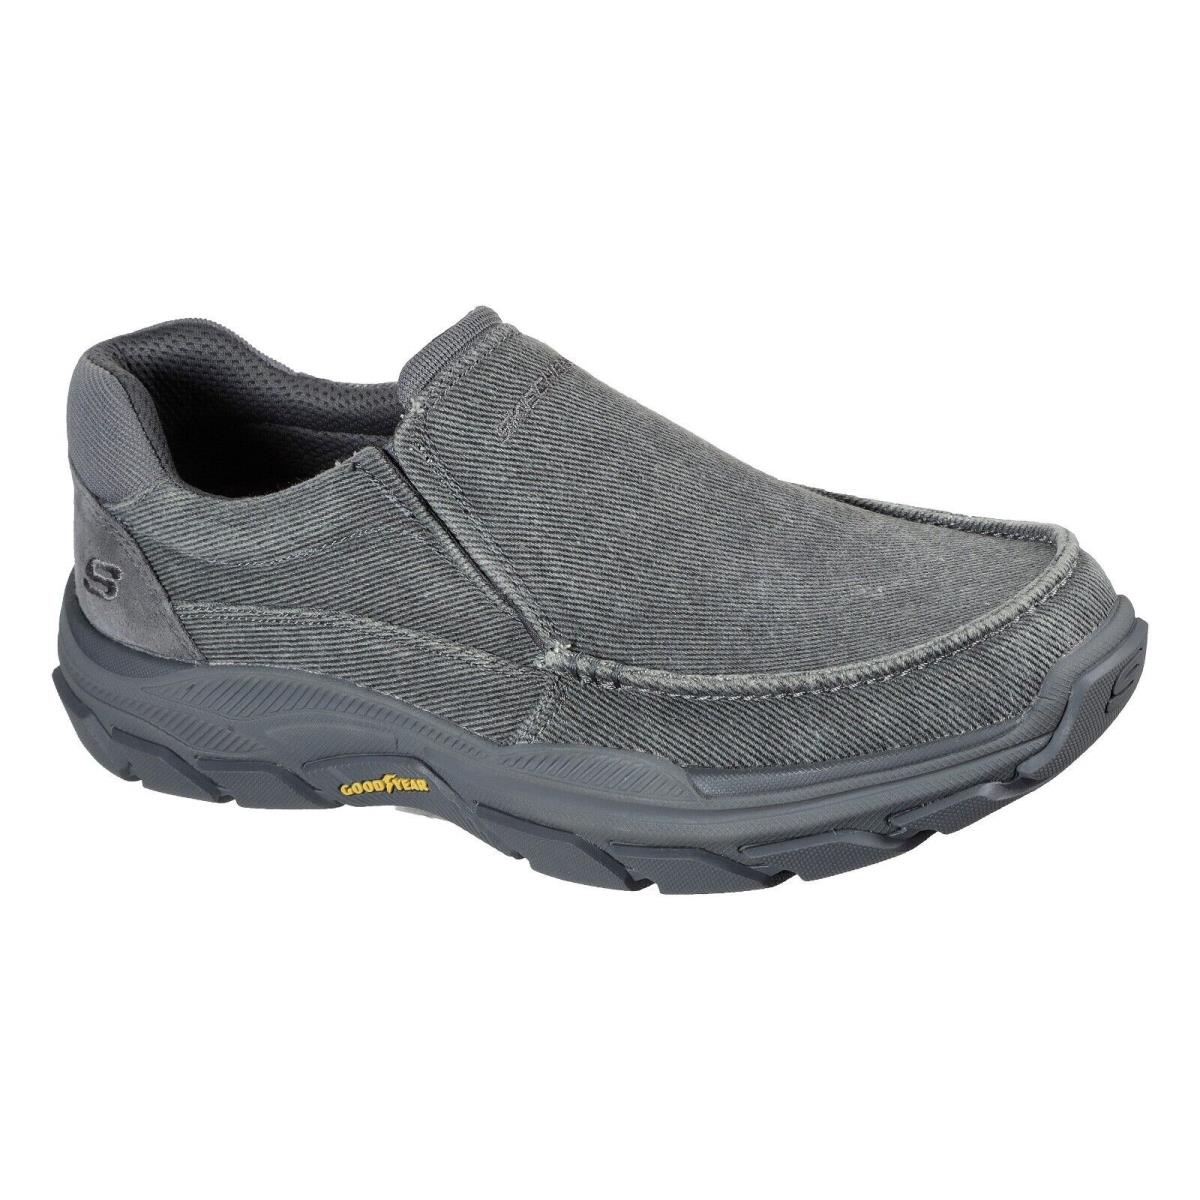 Men`s Skechers Respected Vergo Casual Shoes 204331 /char Multi Sizes Charcoal